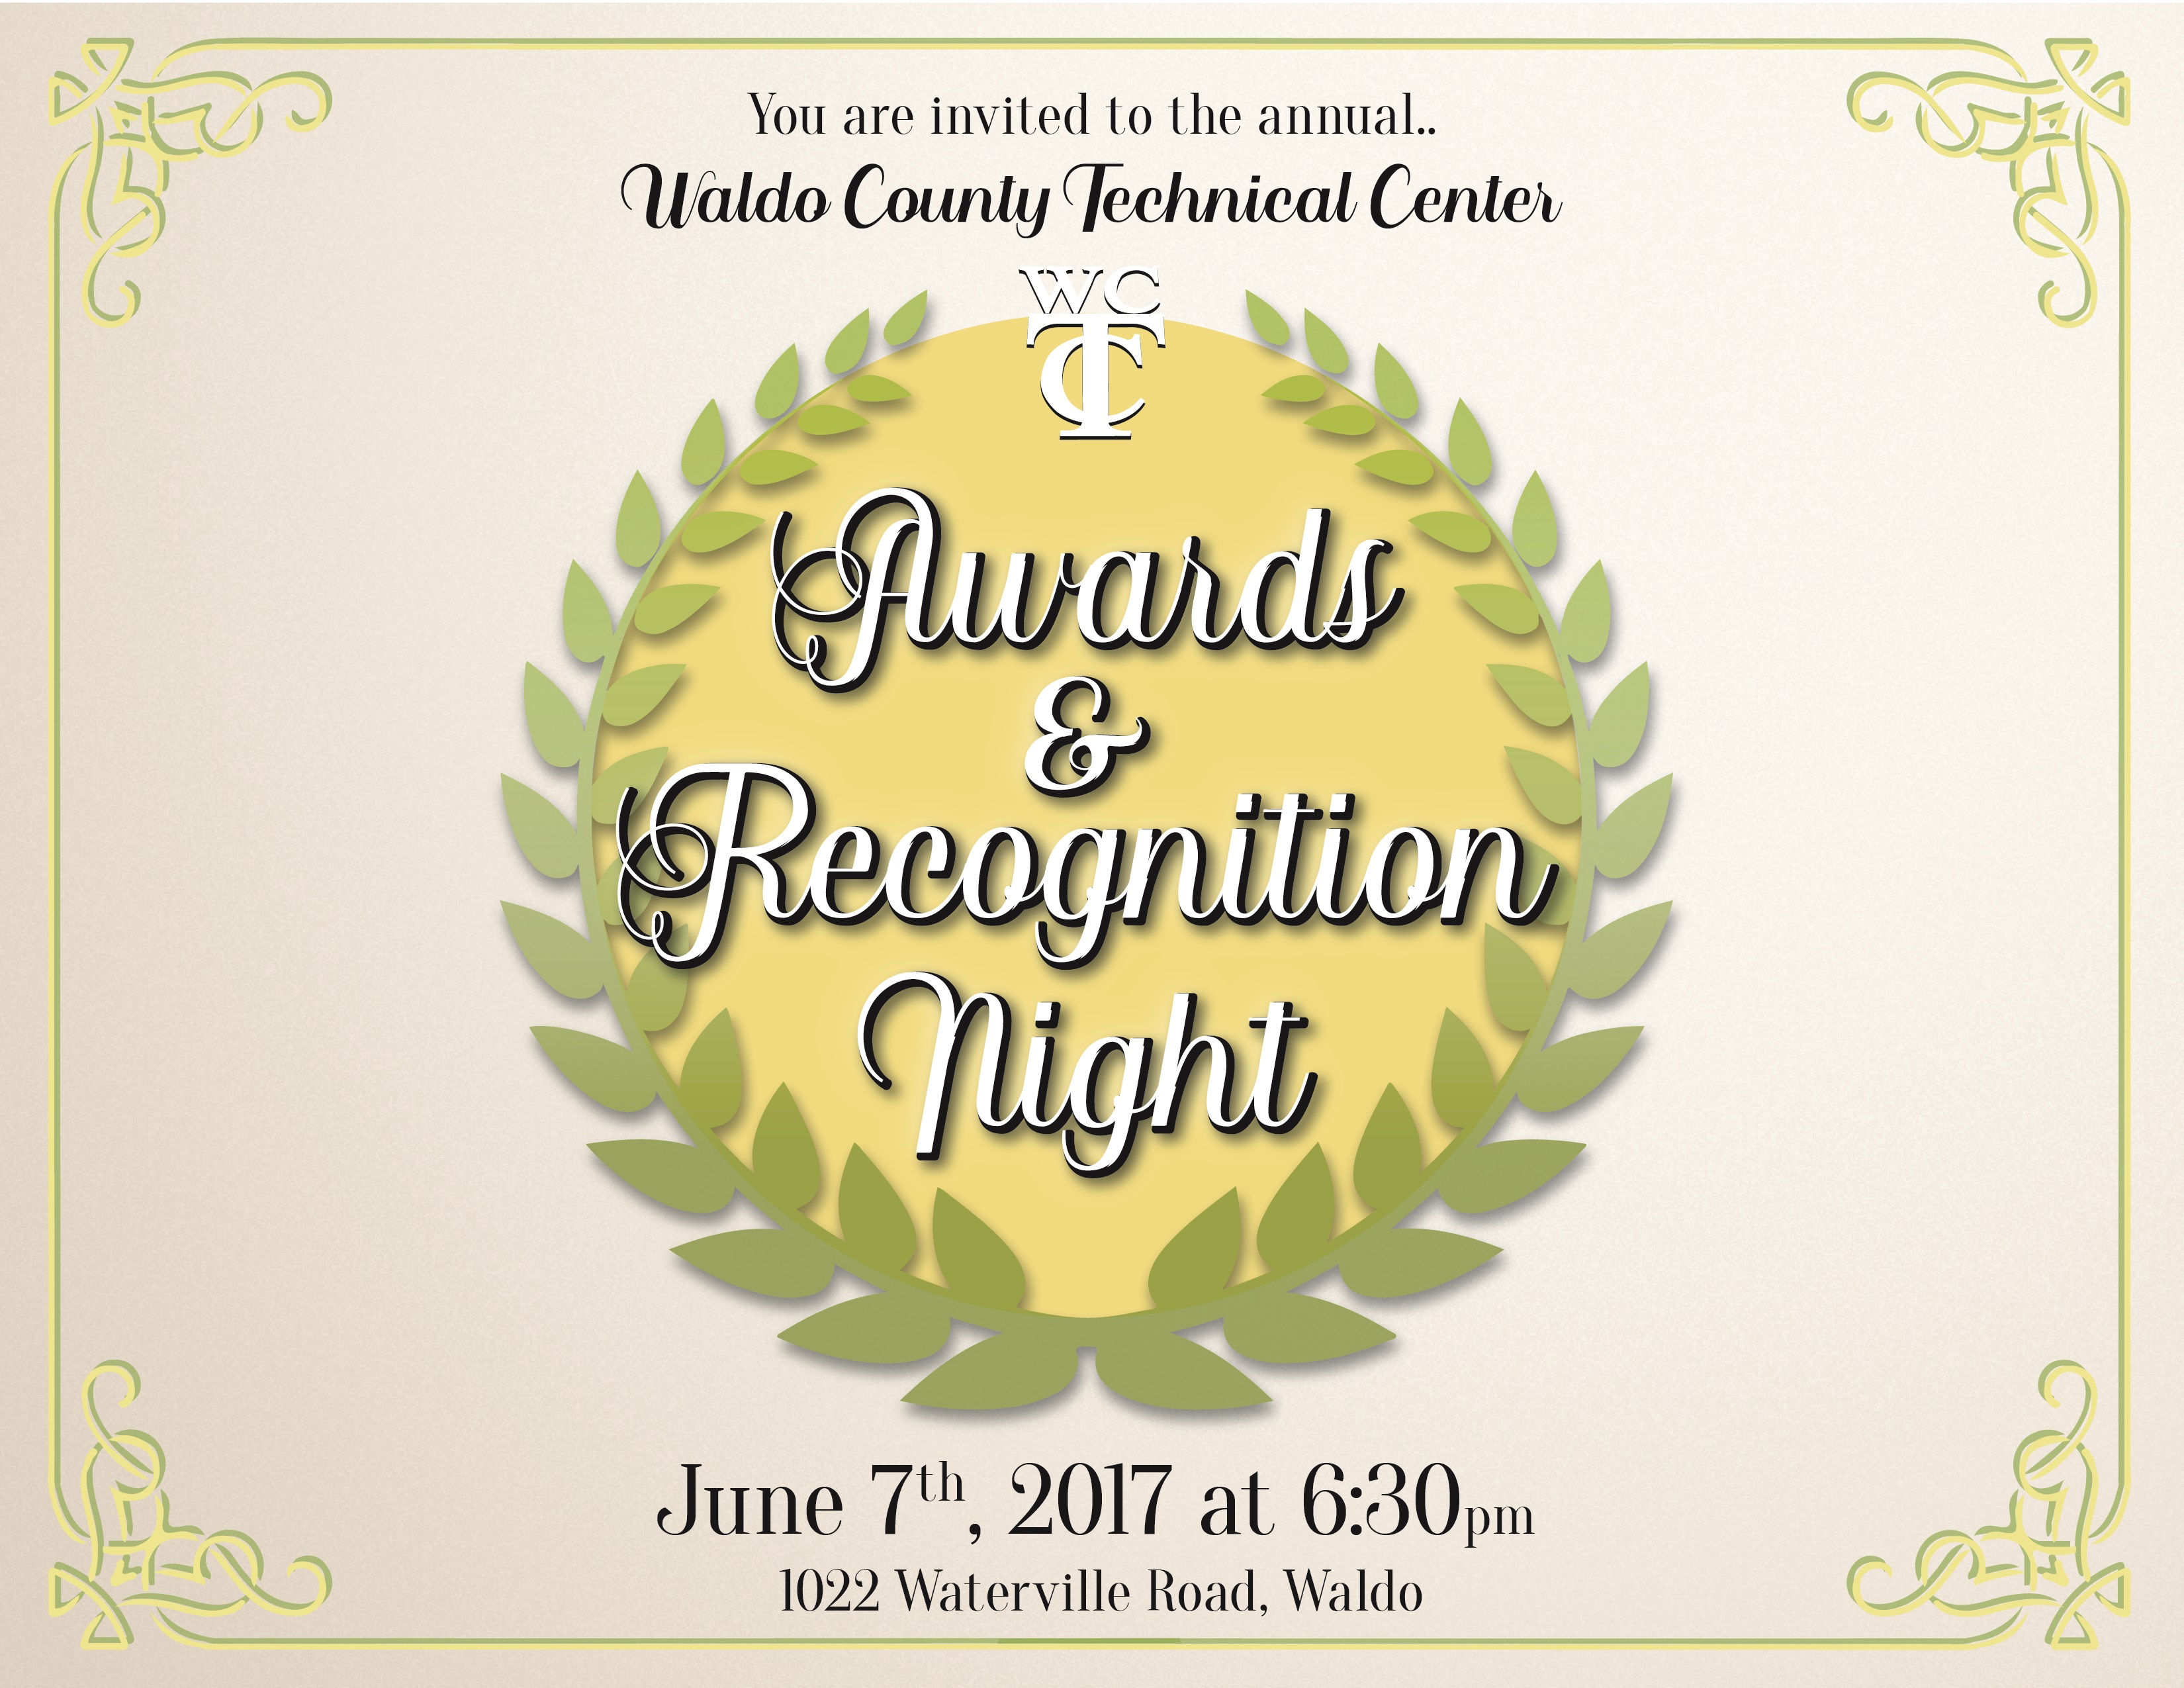 Awards & Recognition Night 2017 